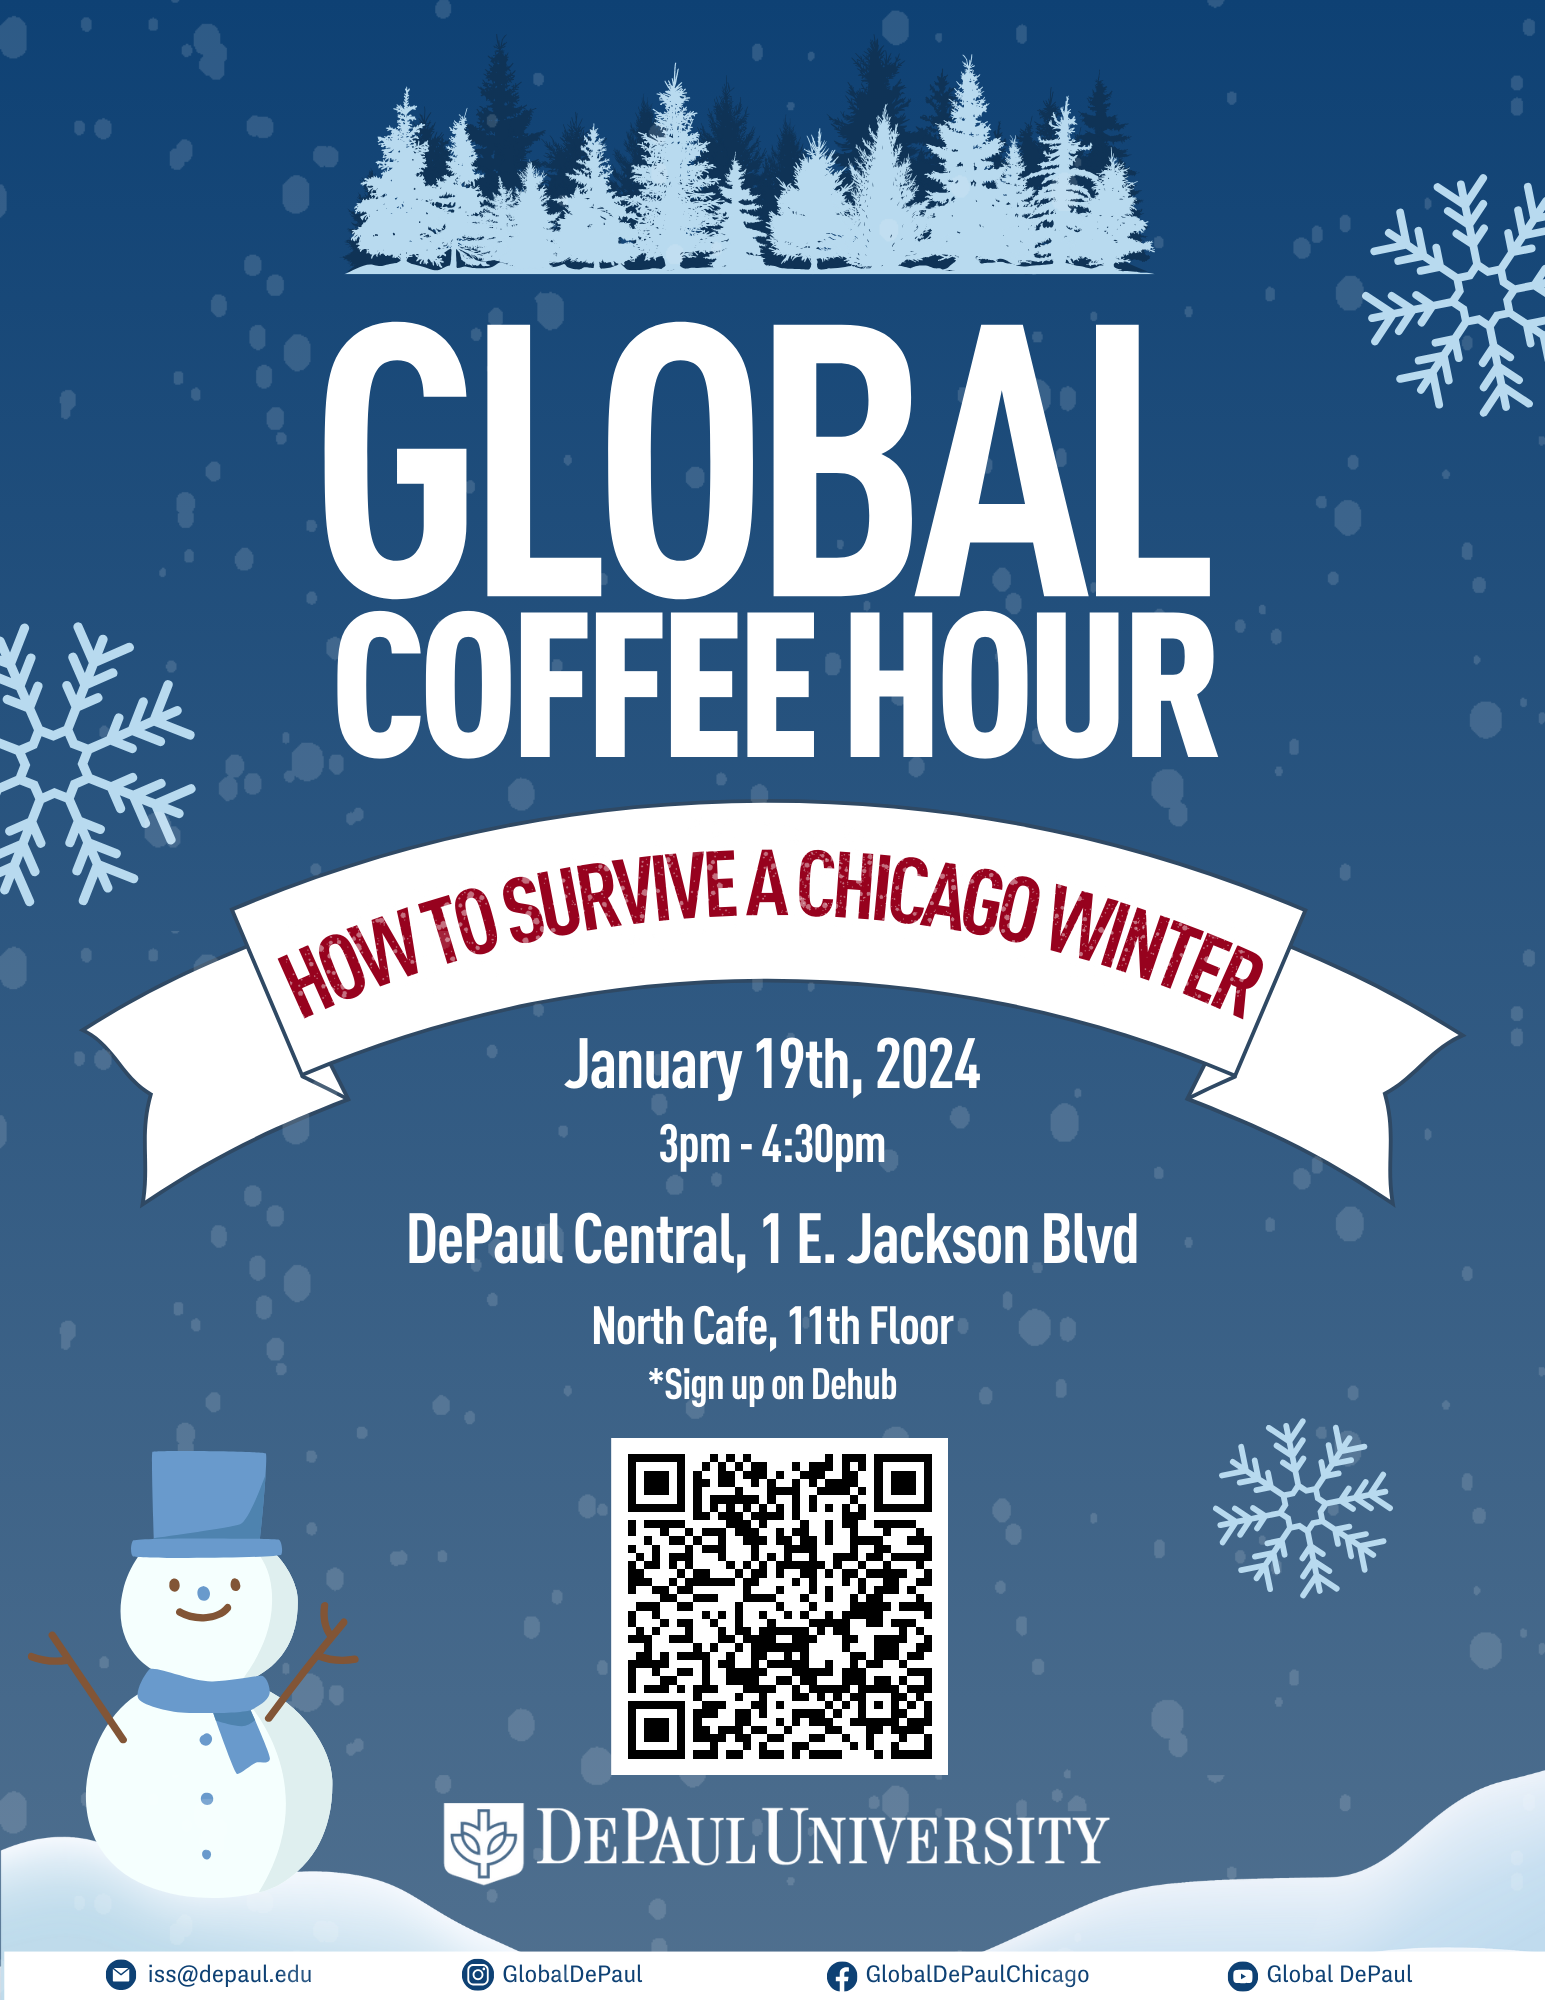 Global Coffee Hour Flyer for Jan 19 2024